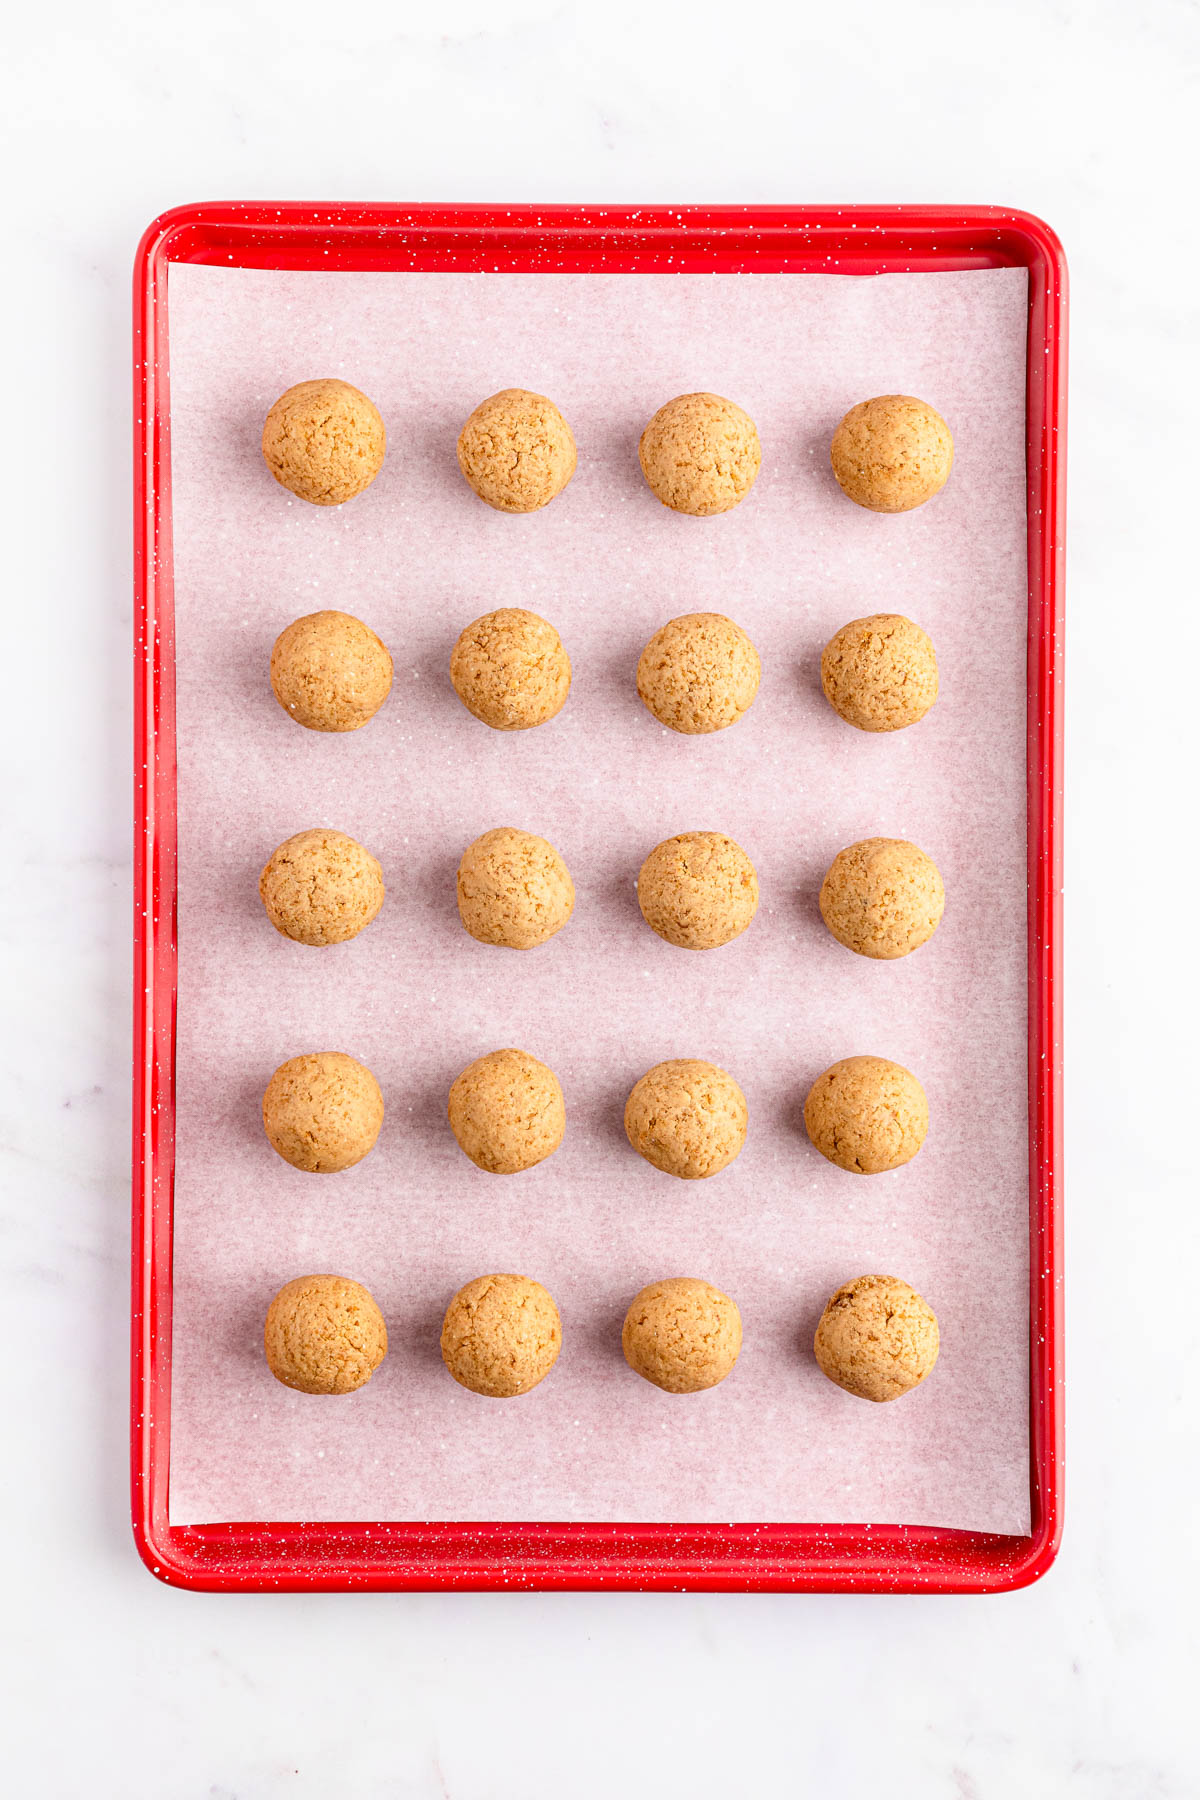 A baking tray filled with gingerbread balls.